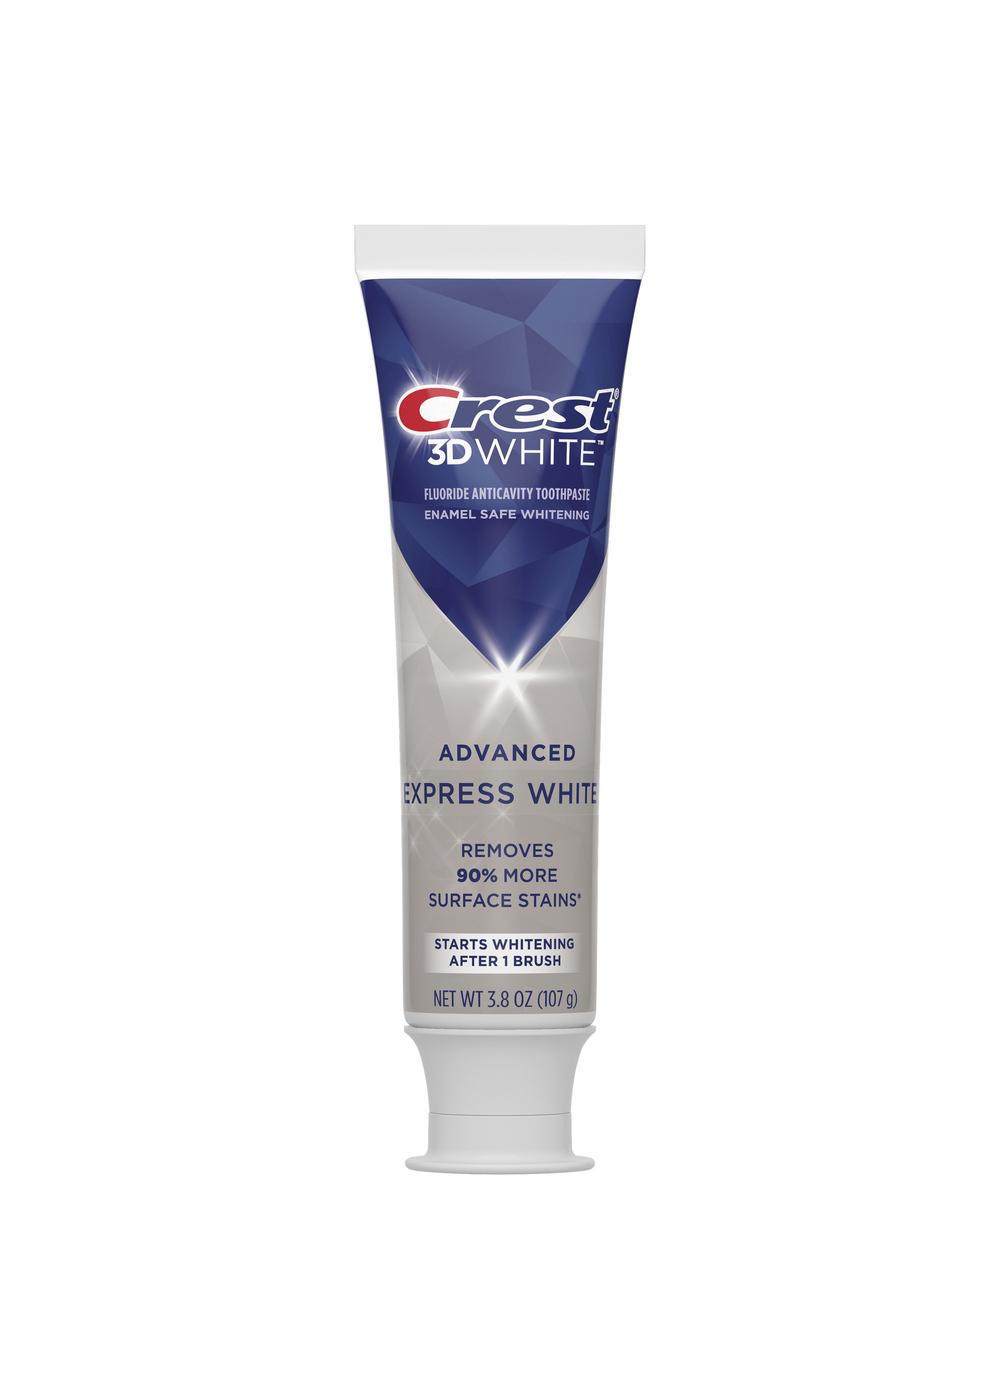 Crest 3D White Advanced Whitening Toothpaste - Express White; image 7 of 16